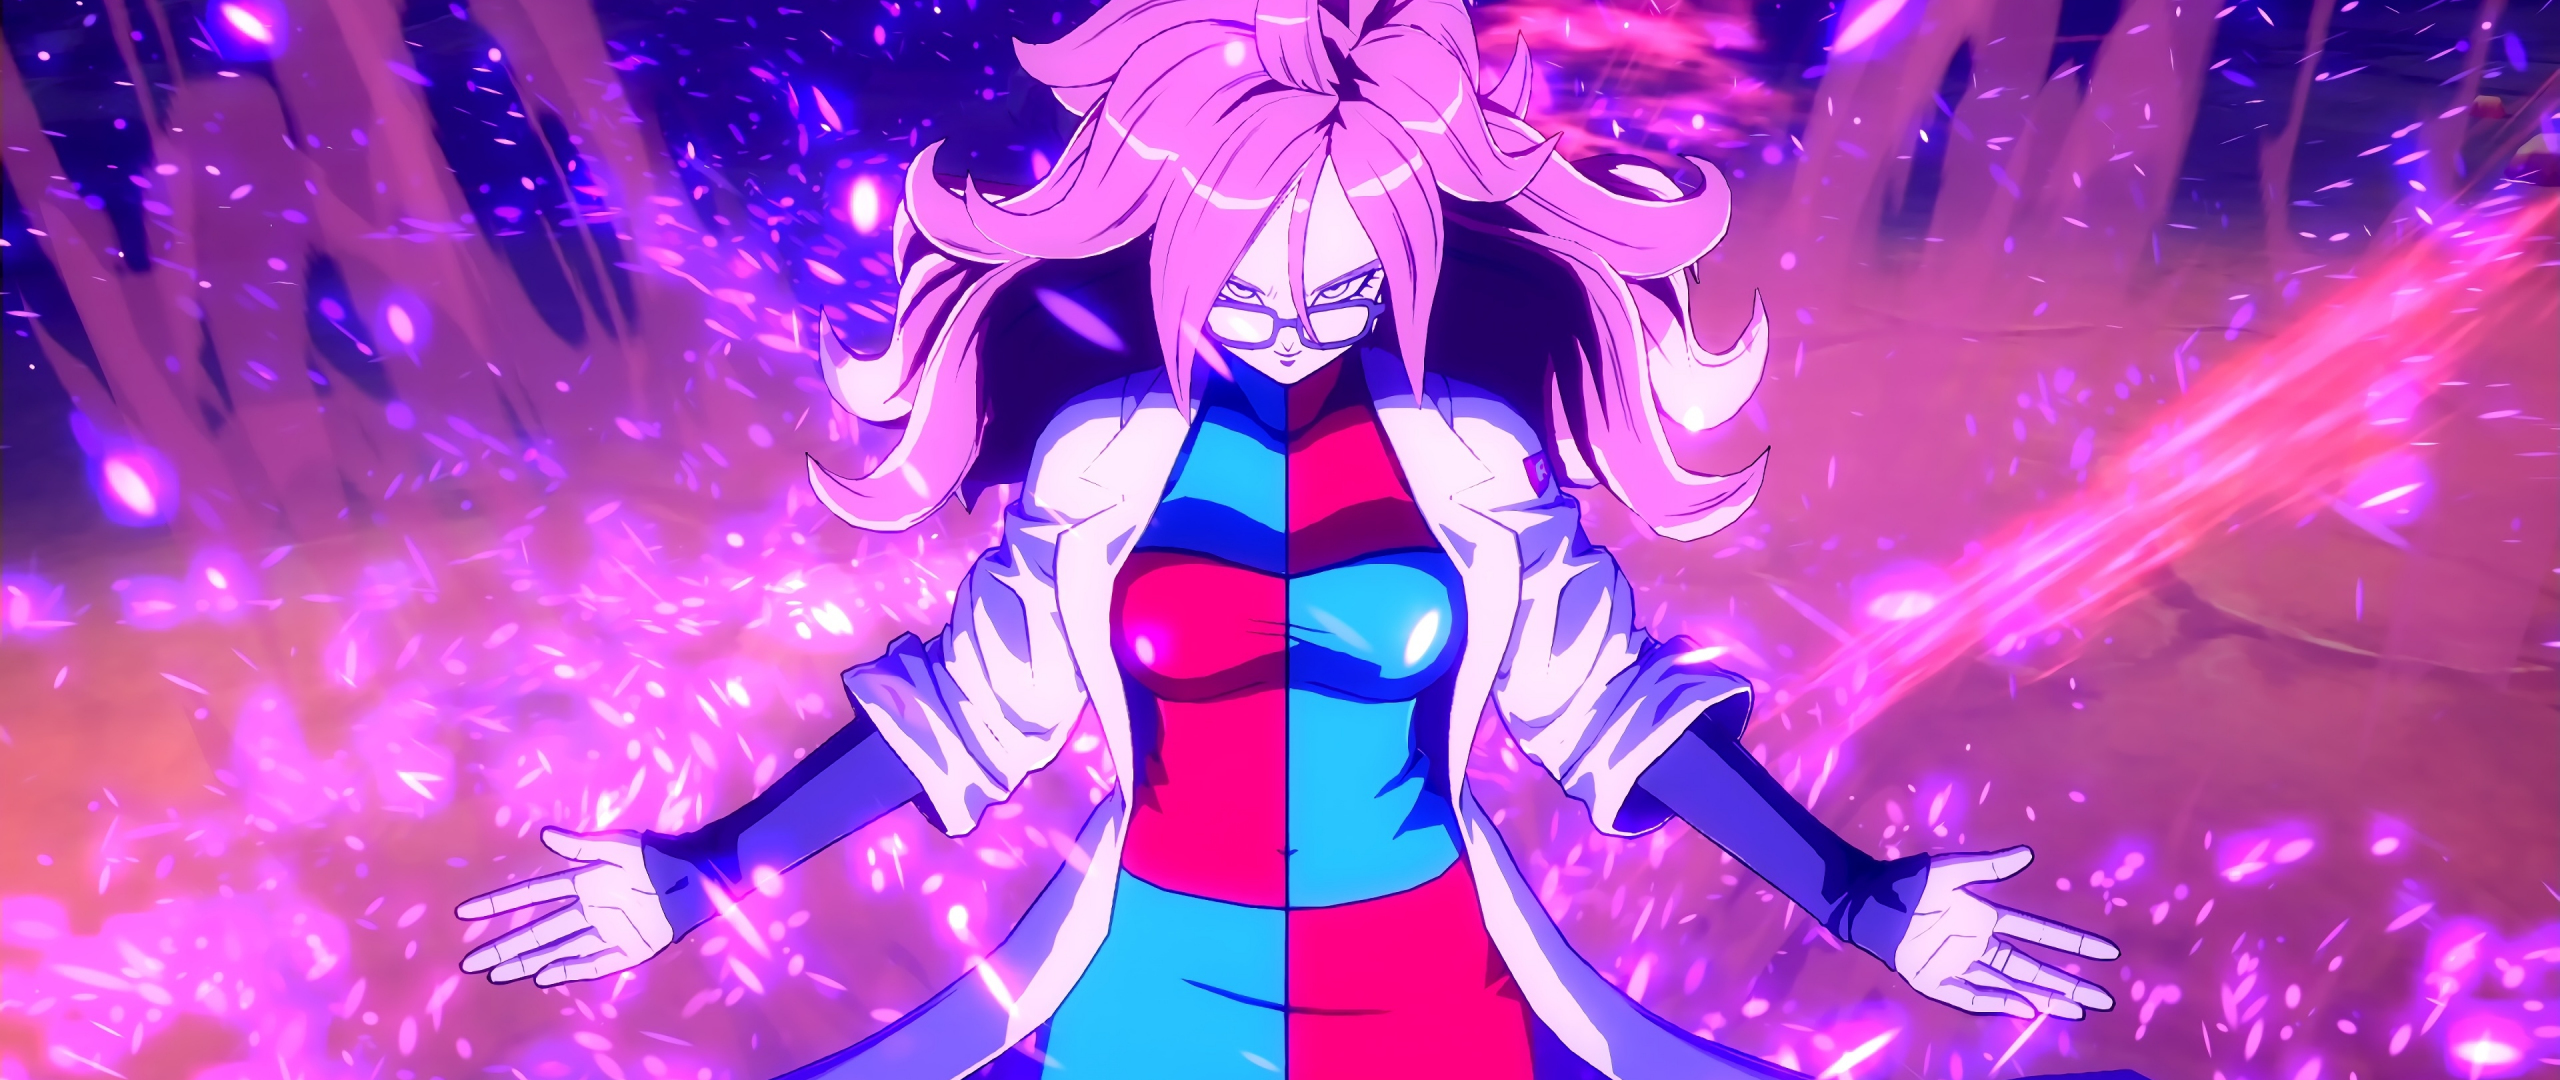 Android 21 full power